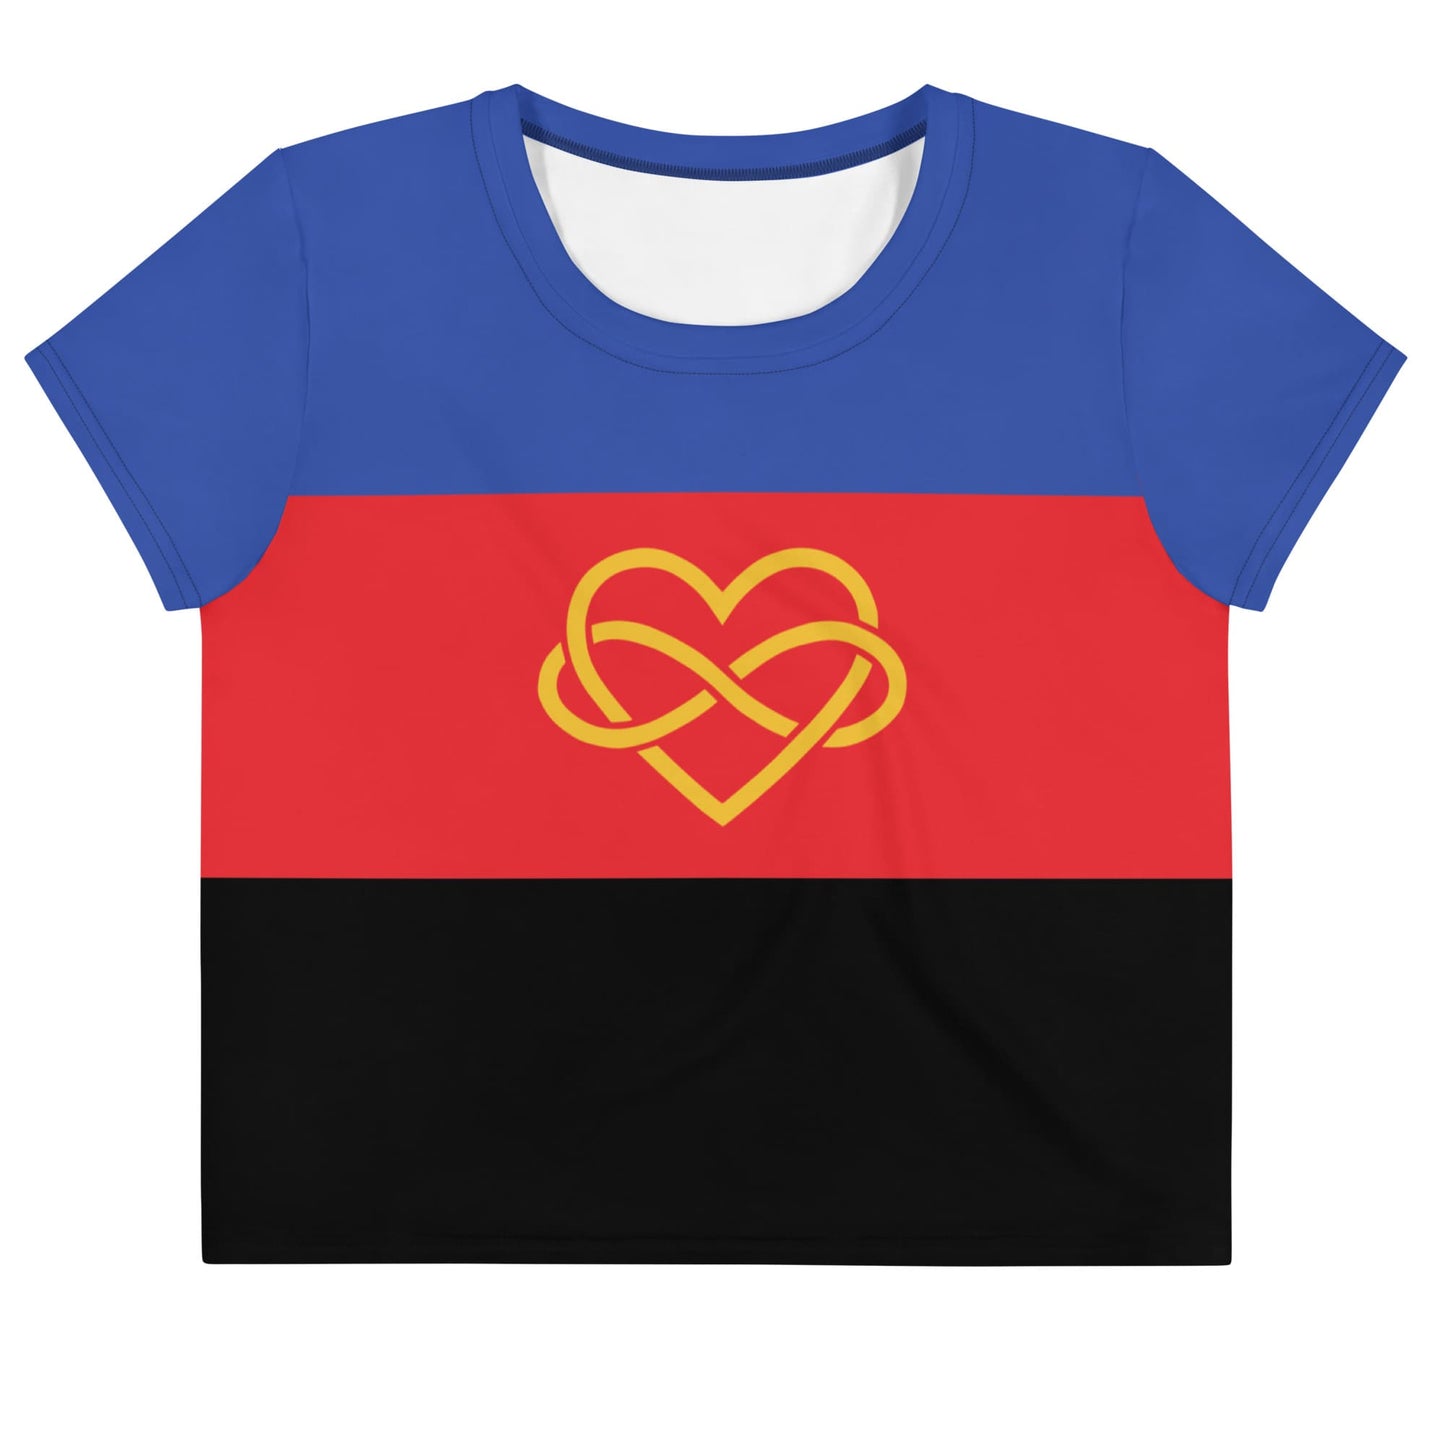 polyamory crop top, flatlay front